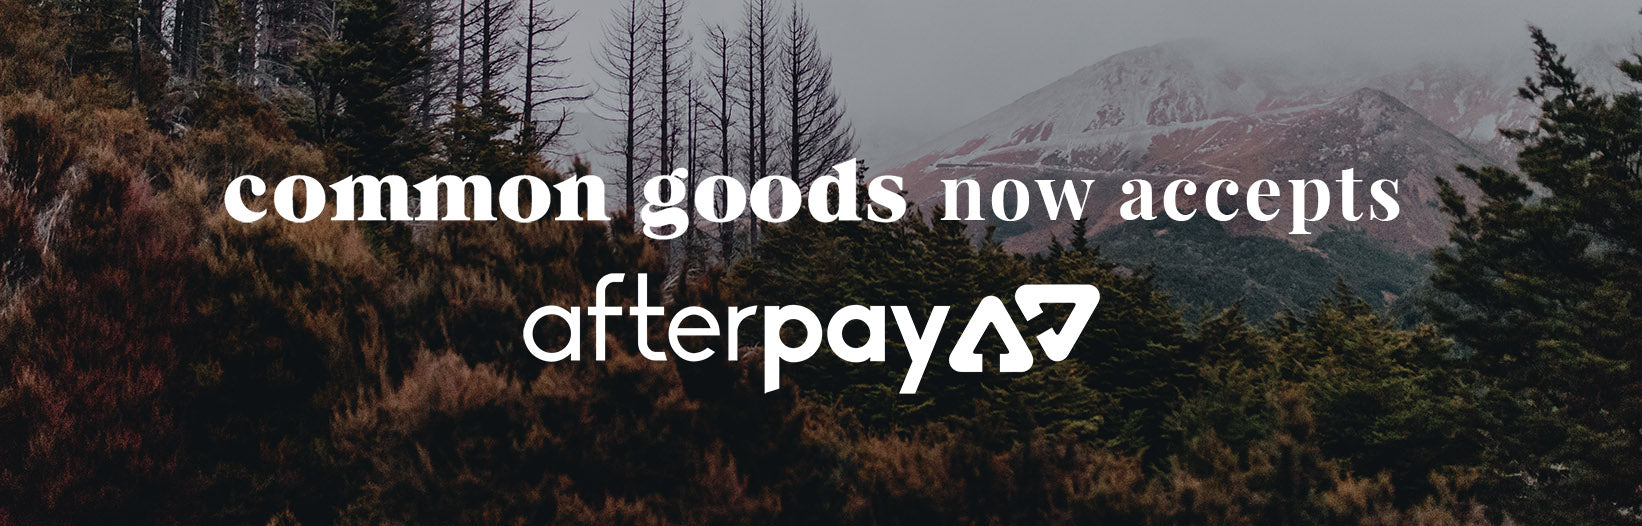 Afterpay Your Purchases at Common Goods - Shop Now, Pay Later